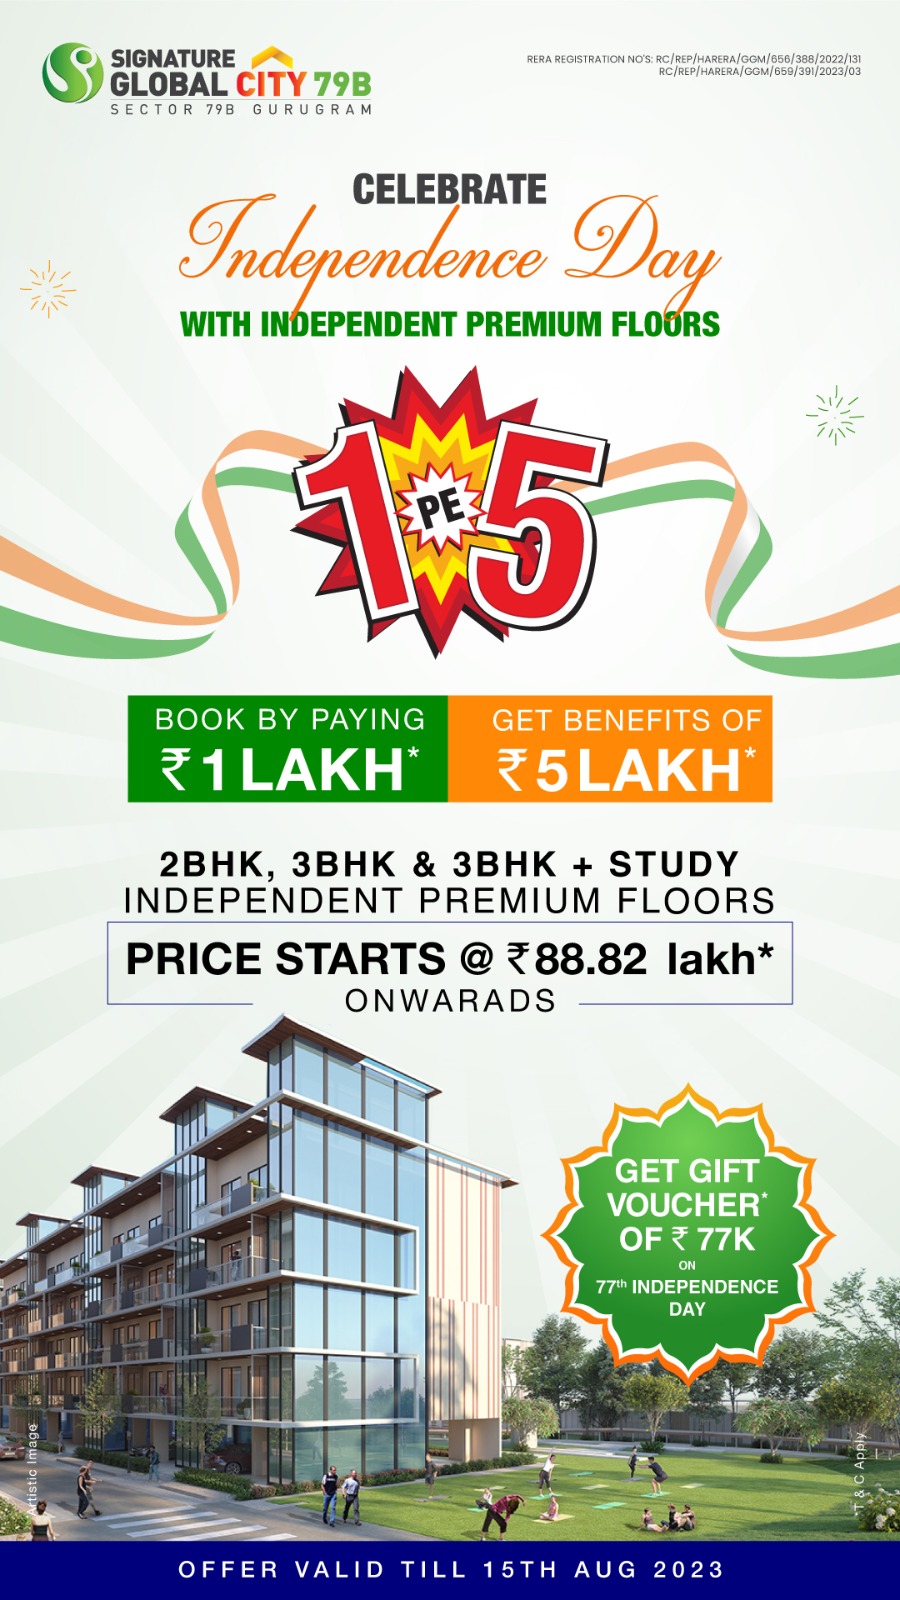 Celebrate Independence Day with Independent premium floors at Signature Global City 79B, Gurgaon